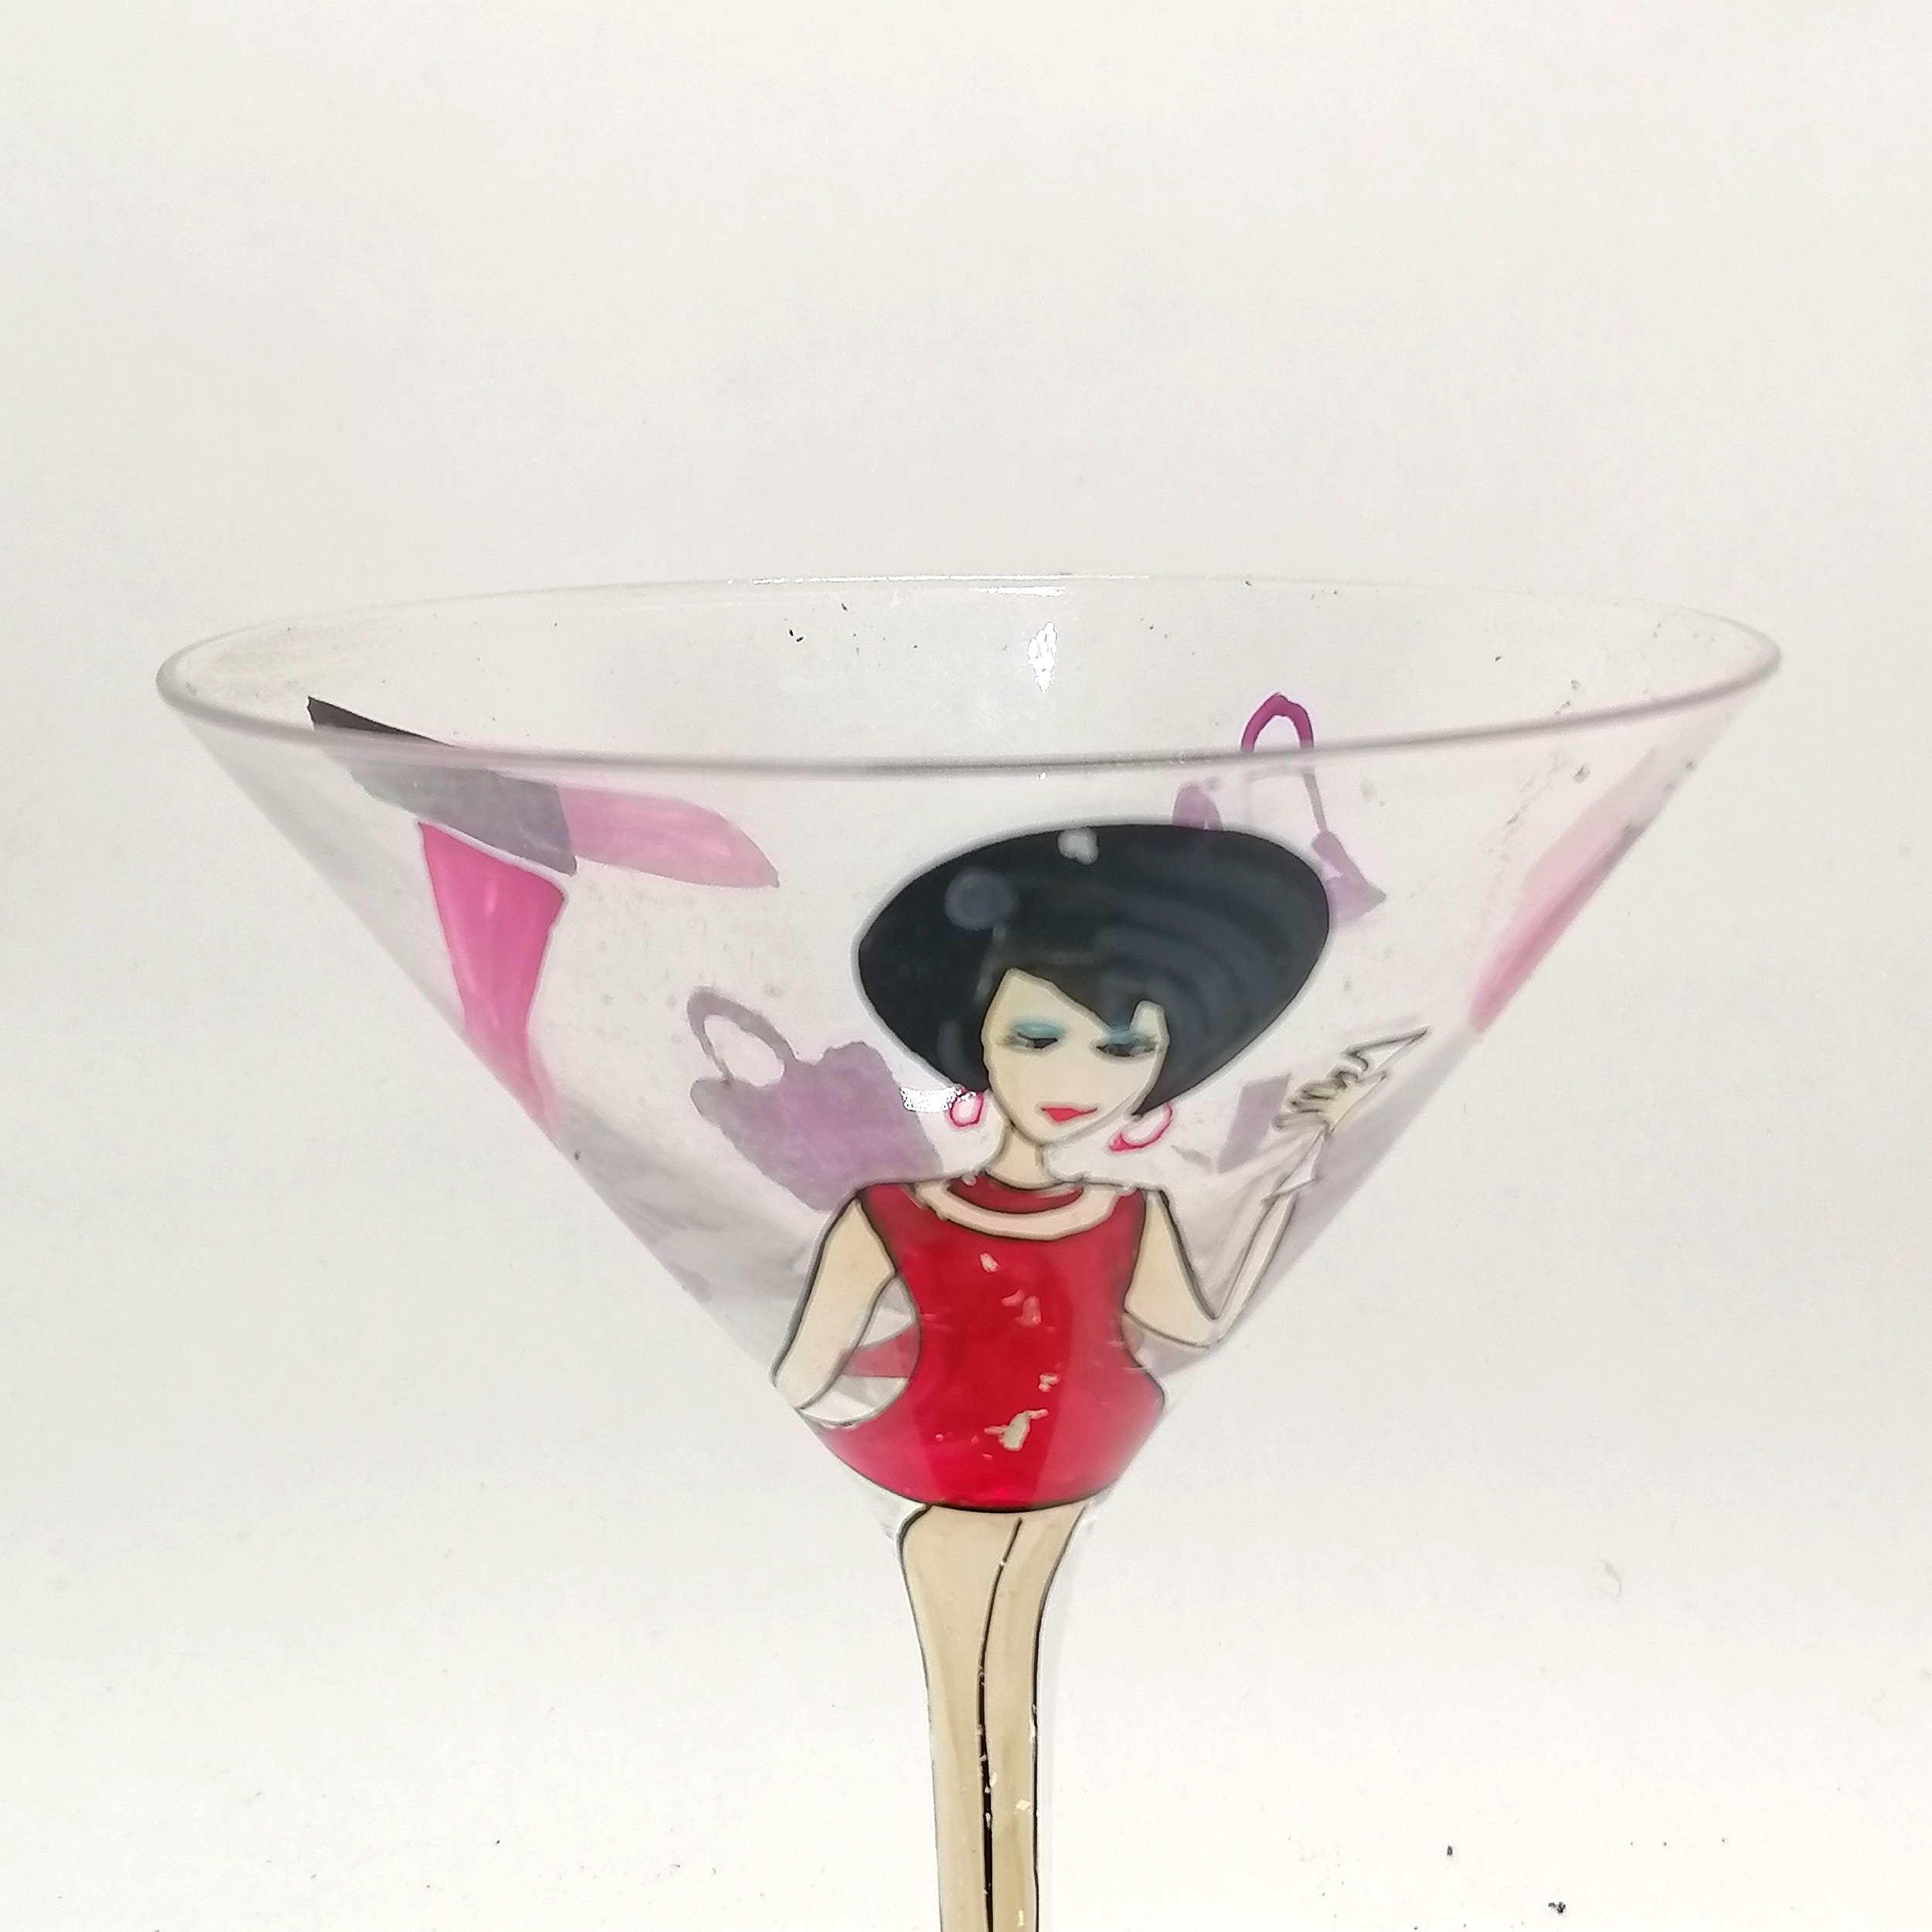 Pair of novelty cocktail glasses with hand decorated 1960's fashion - 19cm high x 12cm diameter - Image 5 of 5